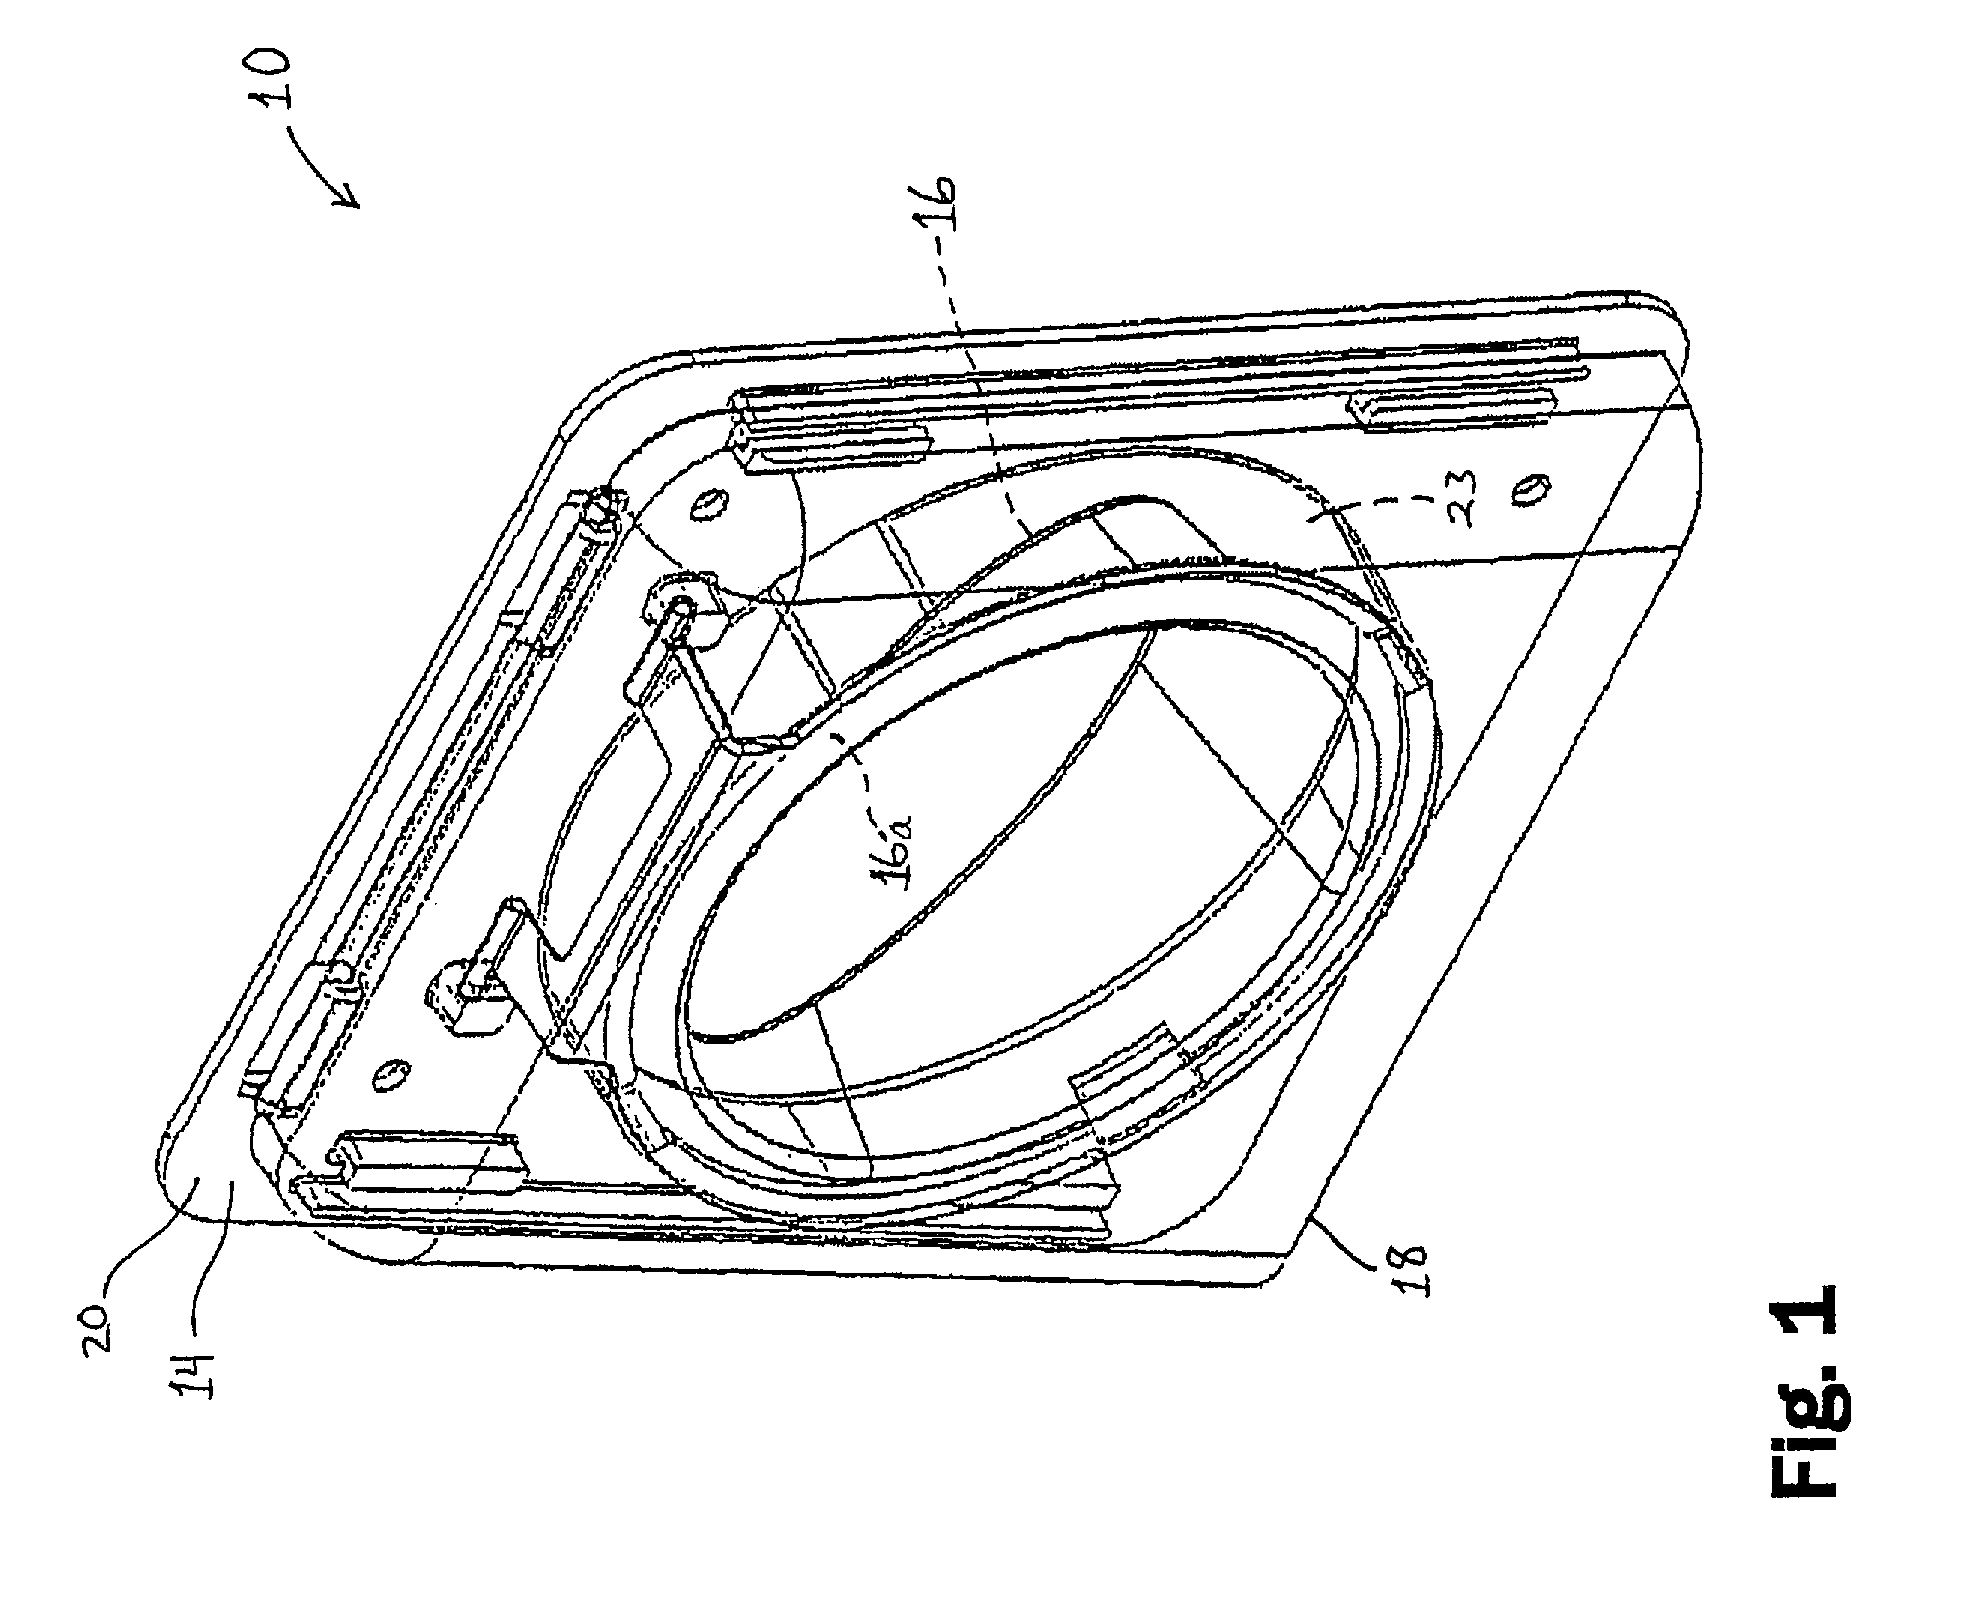 Low profile animal restricting vent for fluid discharge conduits